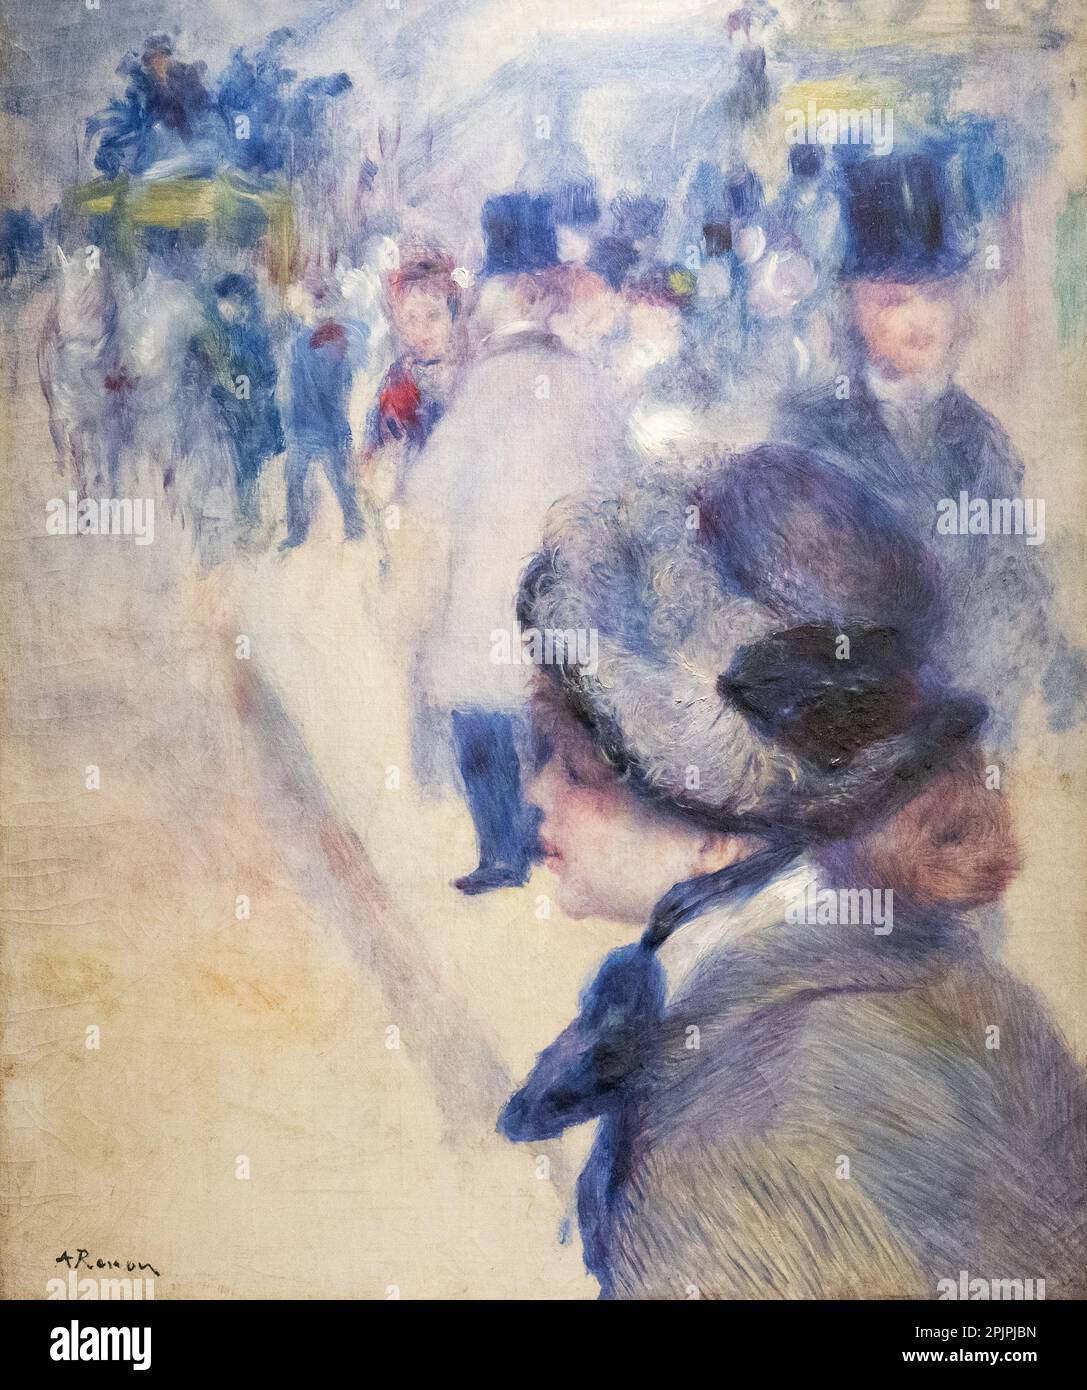 Pierre Auguste Renoir painting, La Place Clichy, c.1880; France; 19th century French Impressionist painter. Example of French Impressionism. Stock Photo